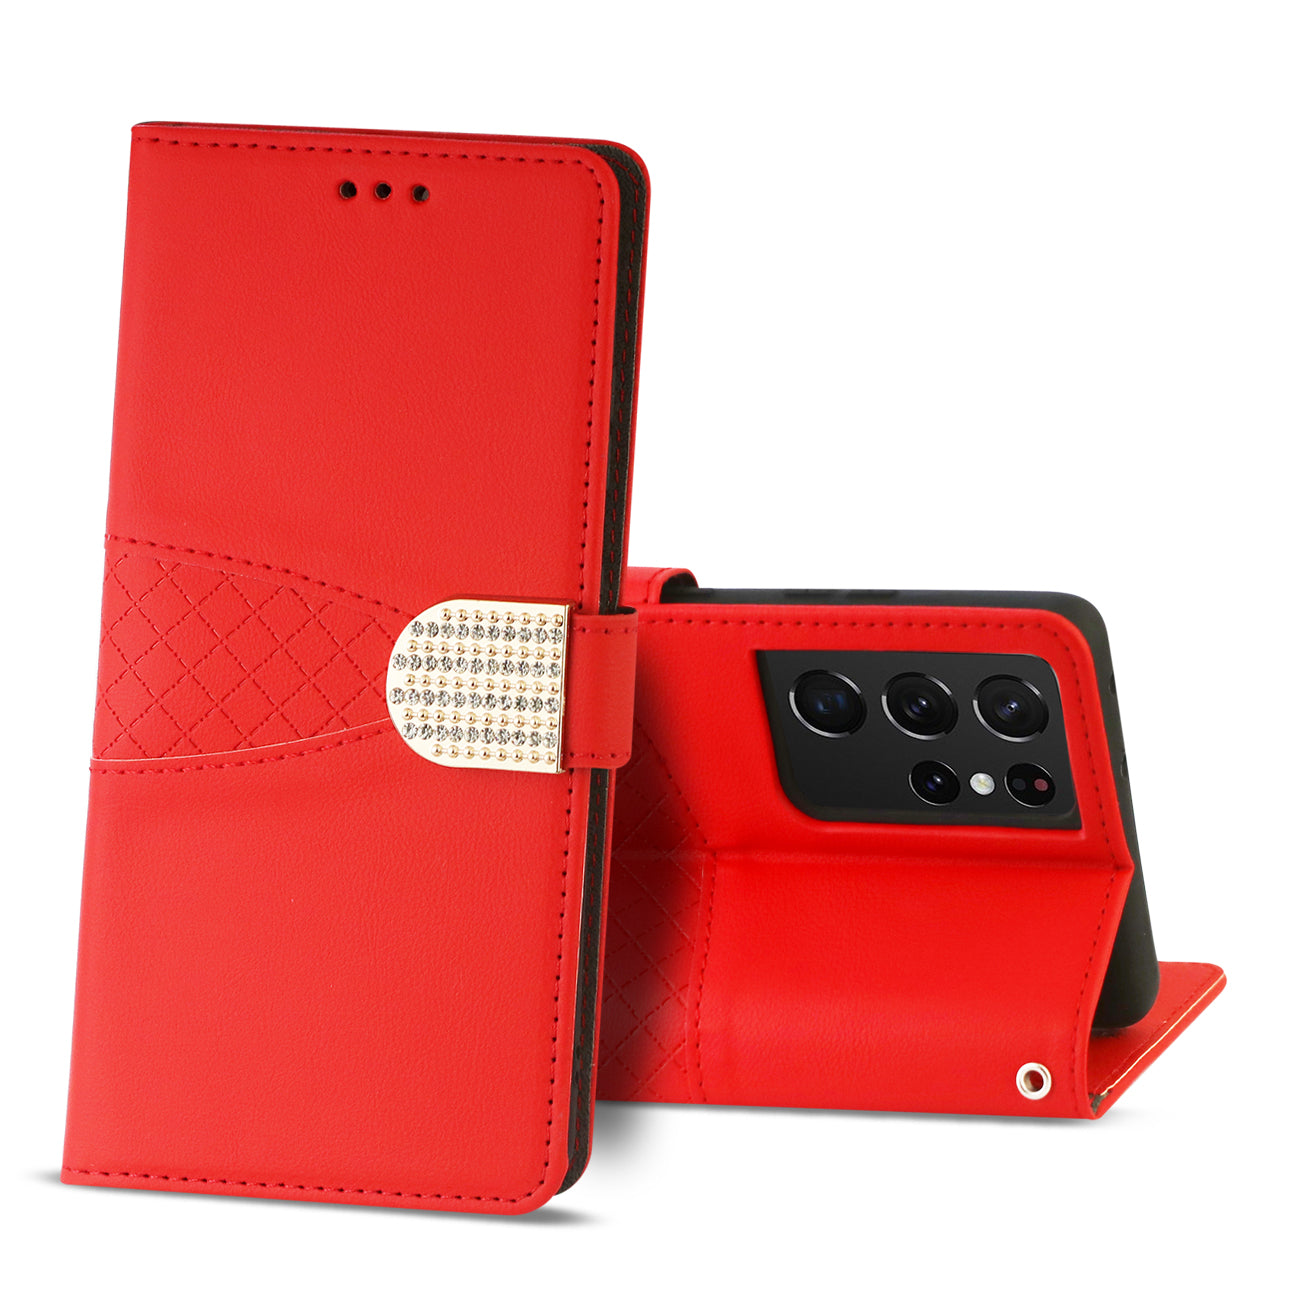 Reiko Samsung Galaxy S21 Ultra 3-In-1 Wallet Case In Red